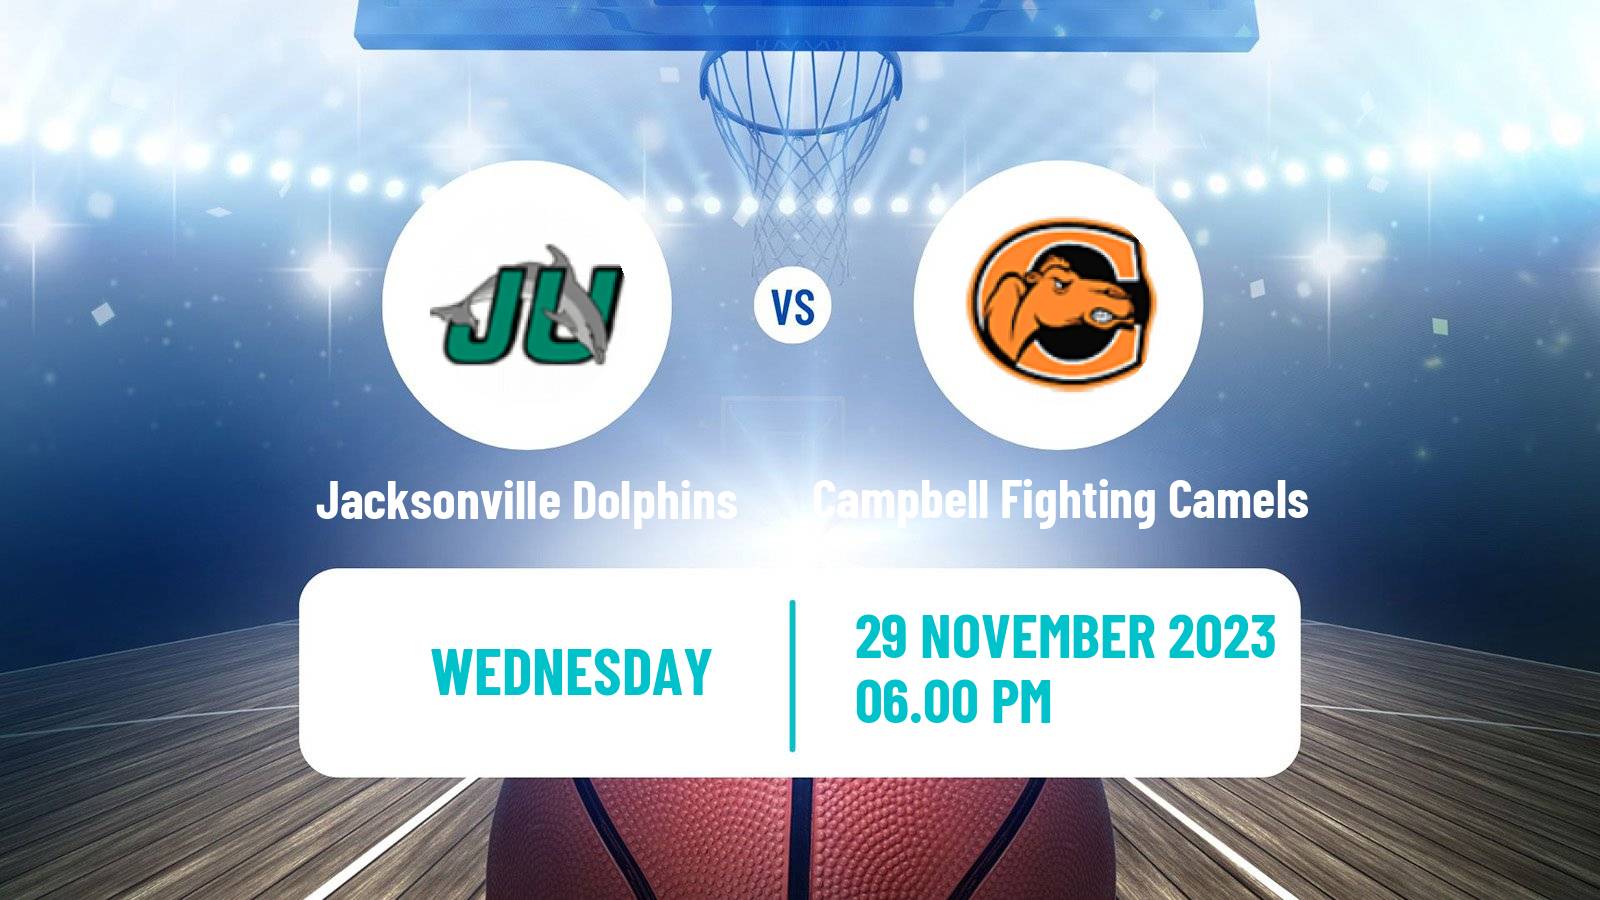 Basketball NCAA College Basketball Jacksonville Dolphins - Campbell Fighting Camels